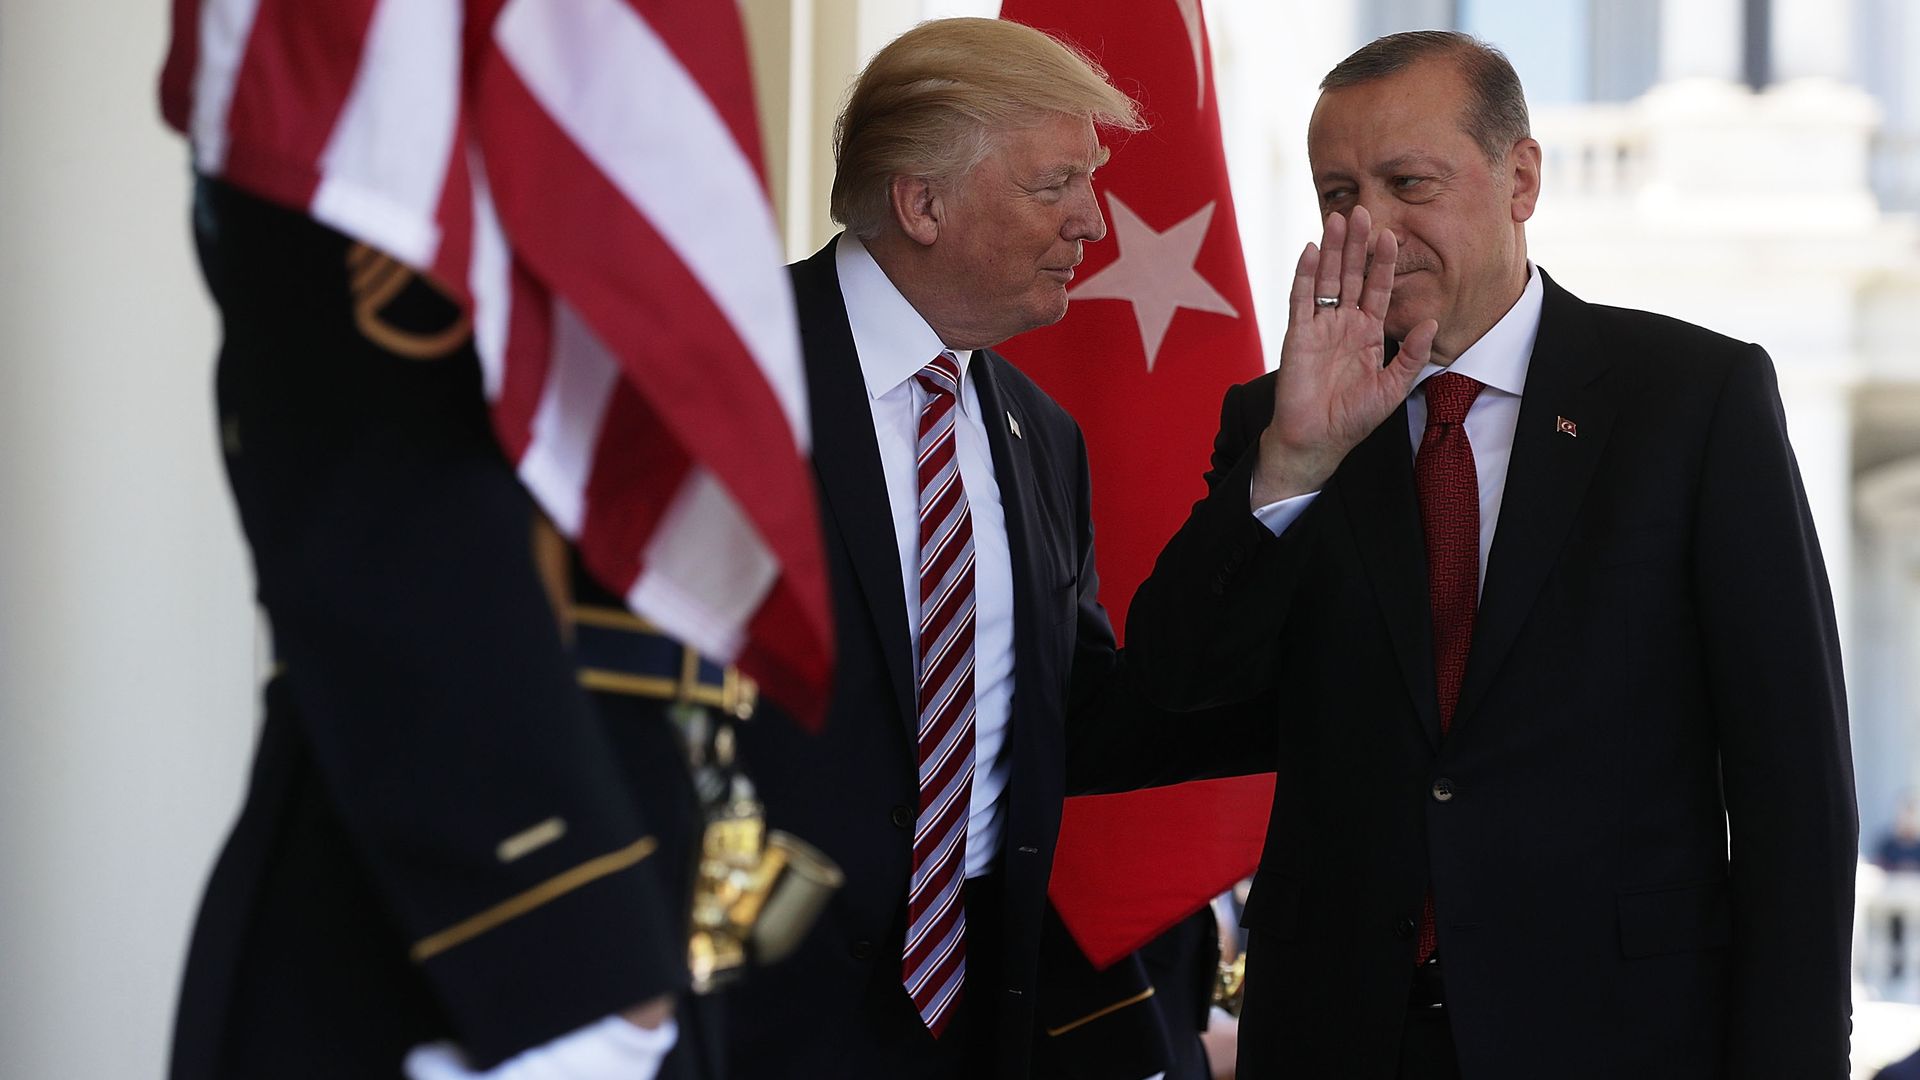 In this image, Trump and the Turkish president speak to each other behind flags